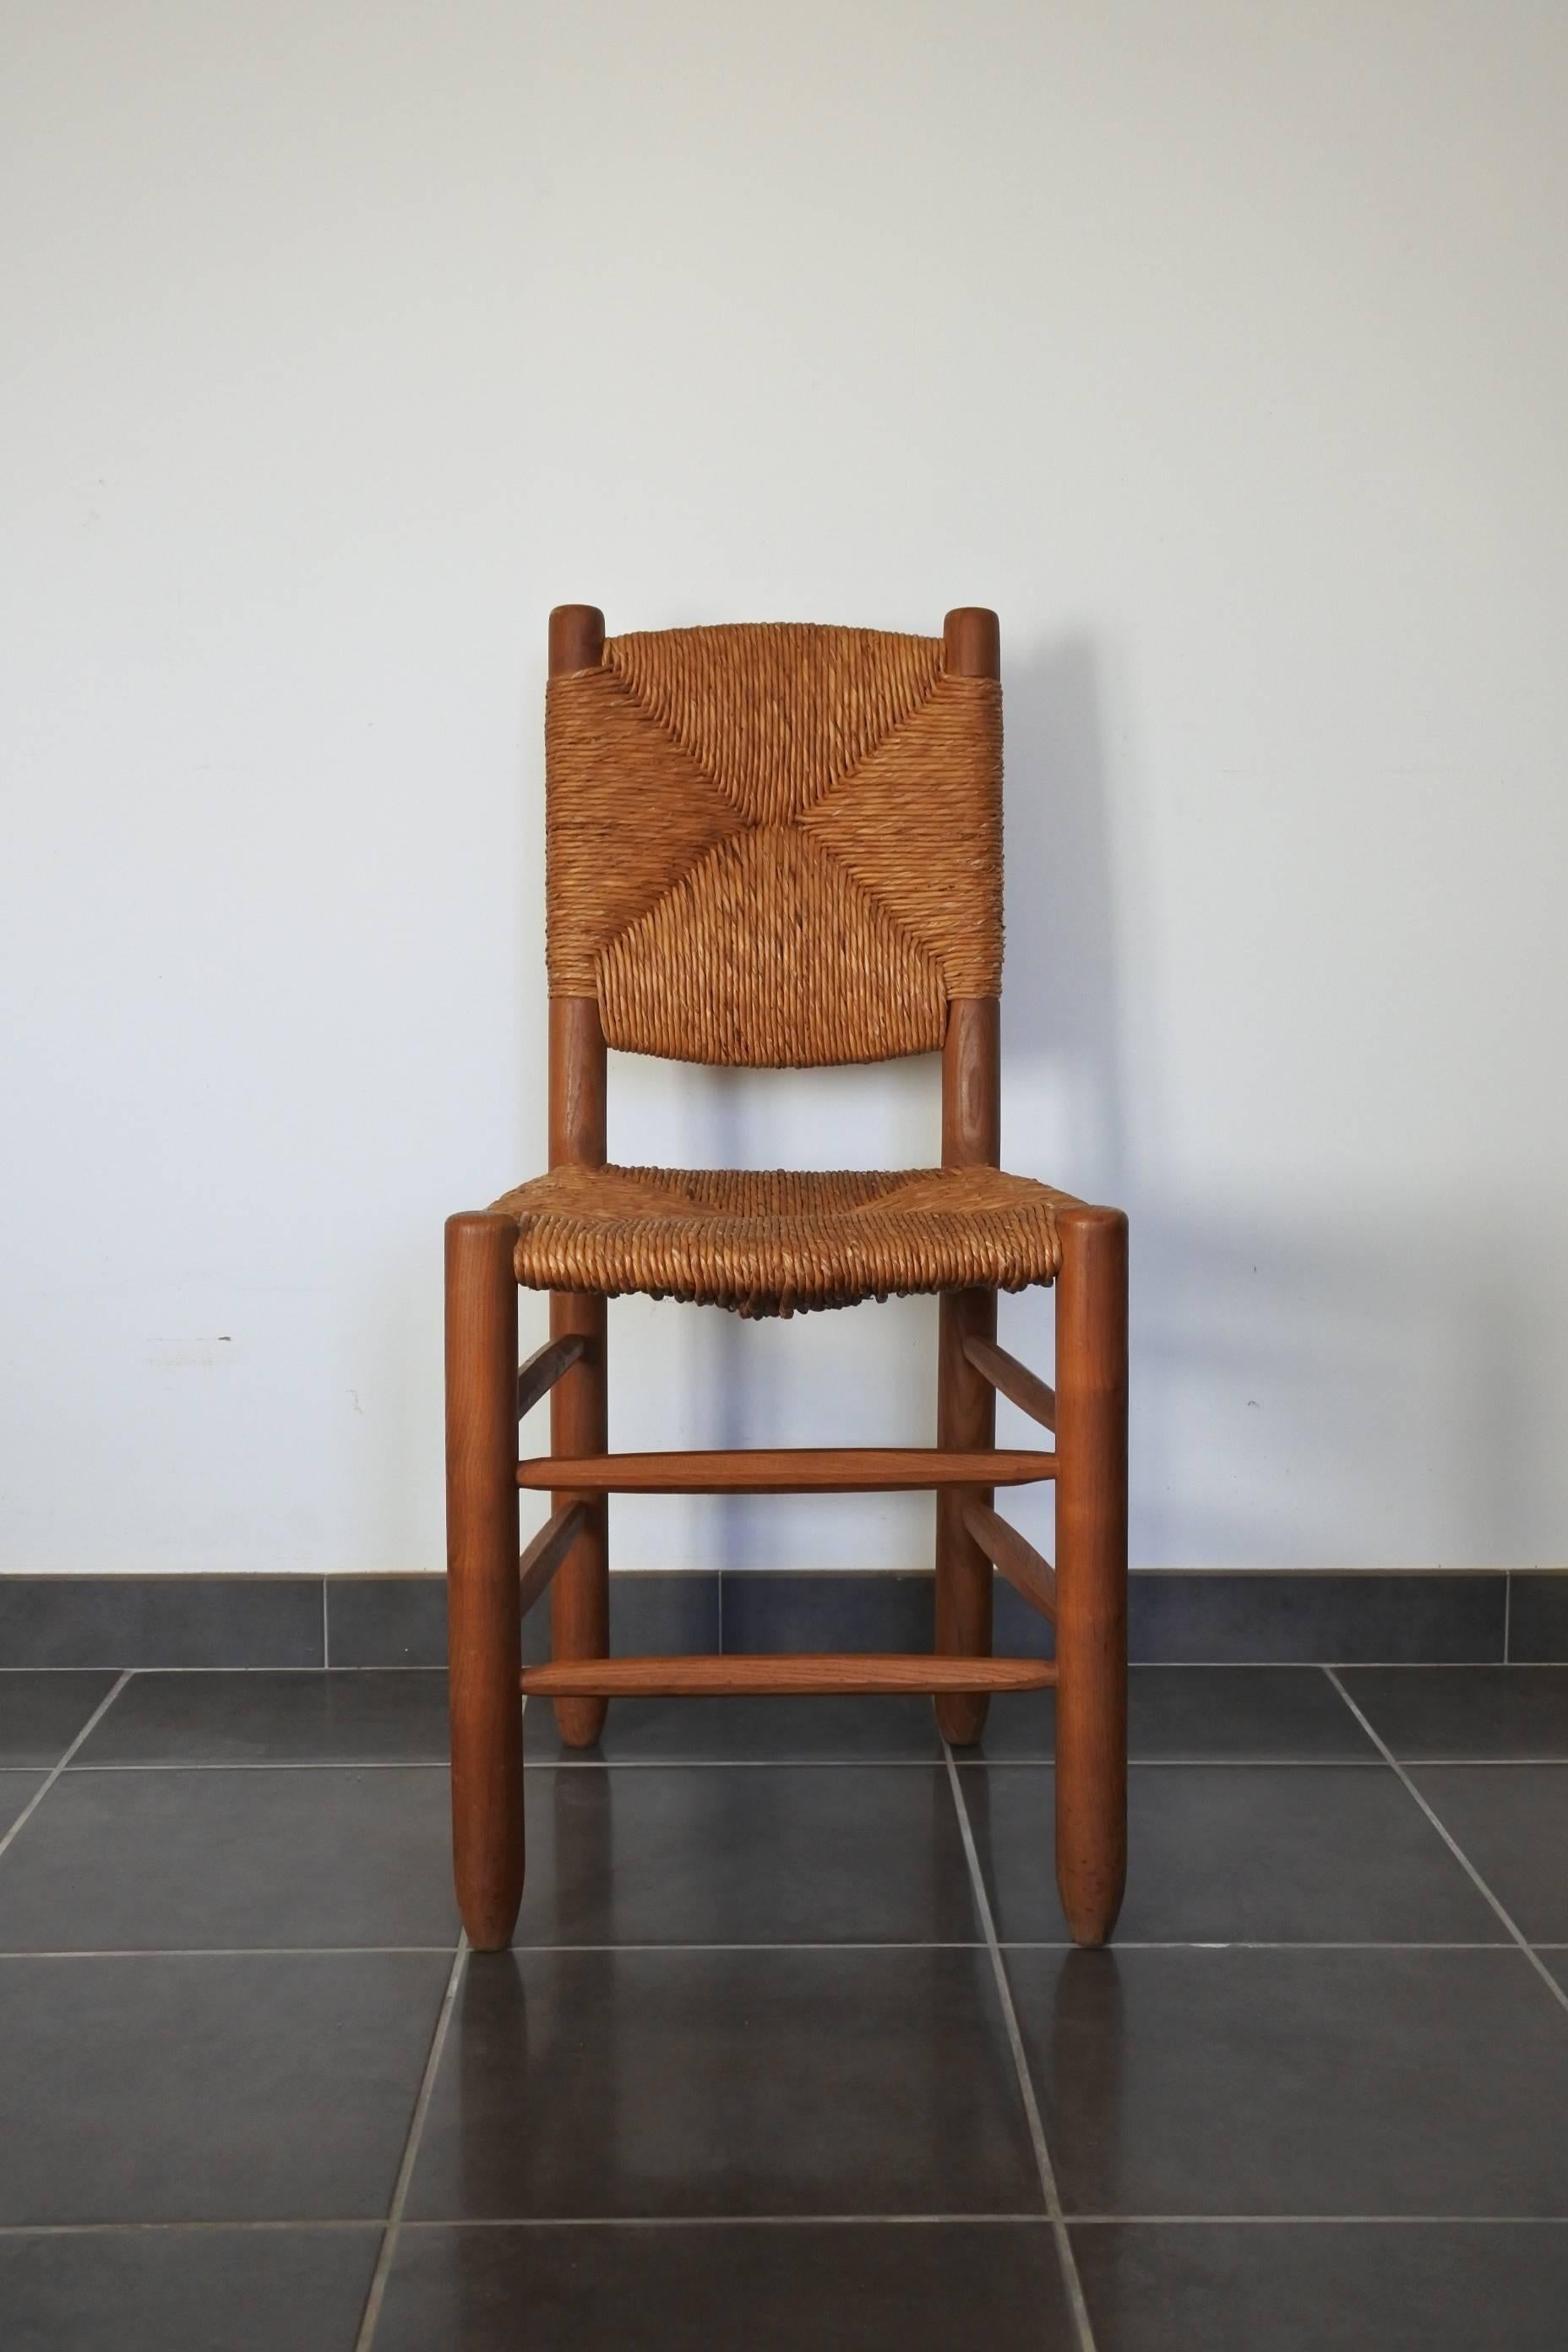 Midcentury chair by French designer Charlotte Perriand and edited by Steph Simon.
Solid wood and rush.
This model of chair, known as number 19, is documented in the book 